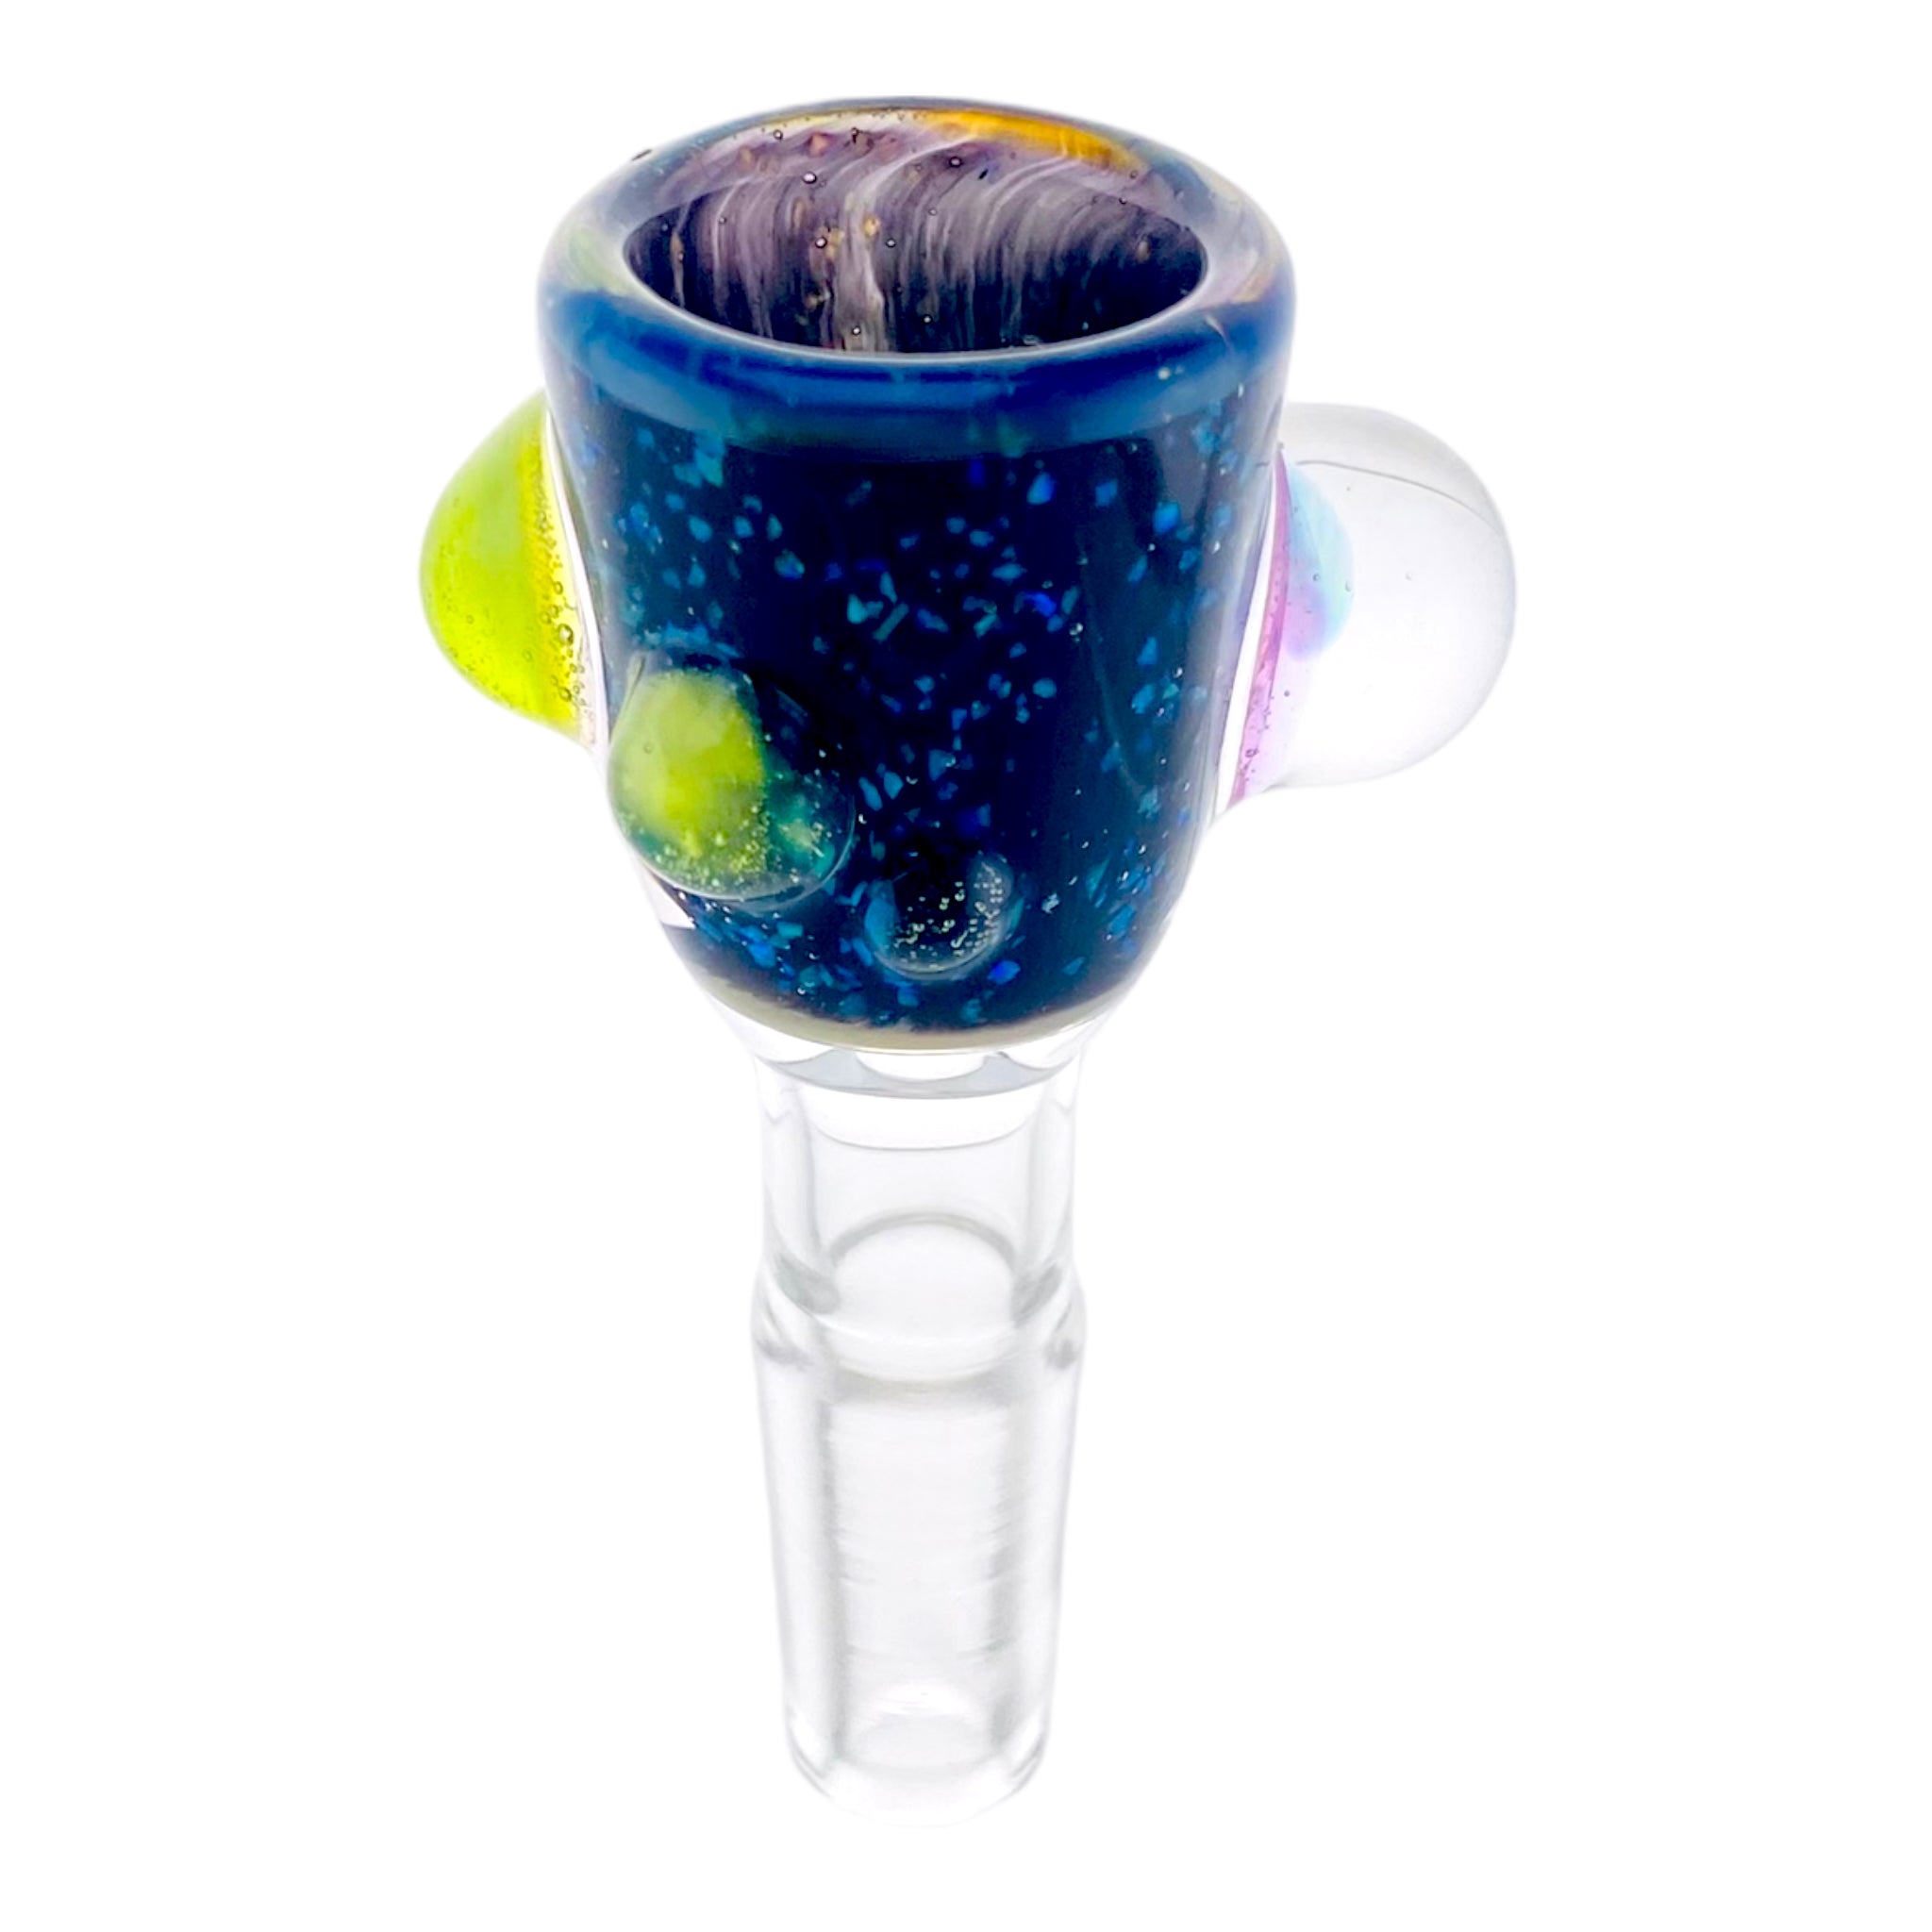 Arko Glass - 10mm Flower Bowl With Crushed Opal